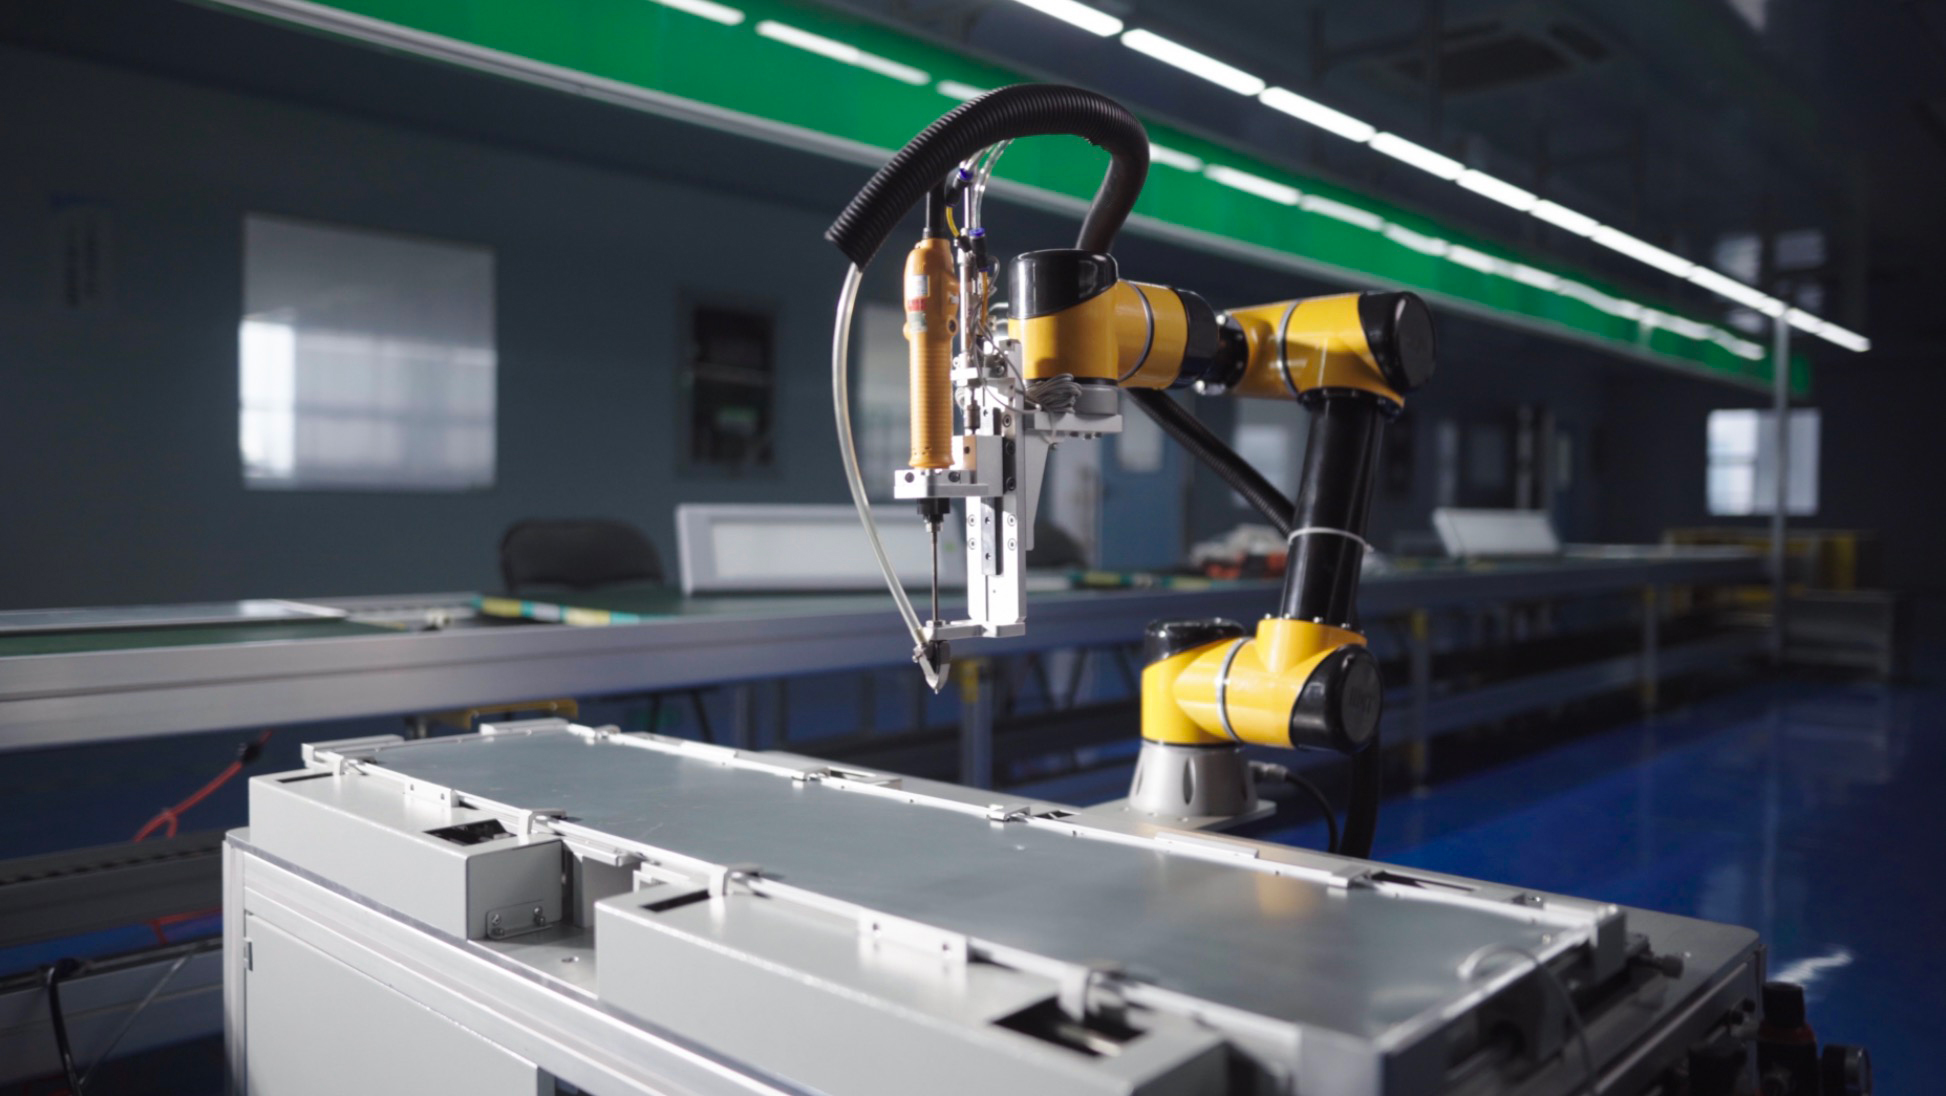 The Future of Collaborative Robot Beyond 2024 – Five Predictions You Need to Know